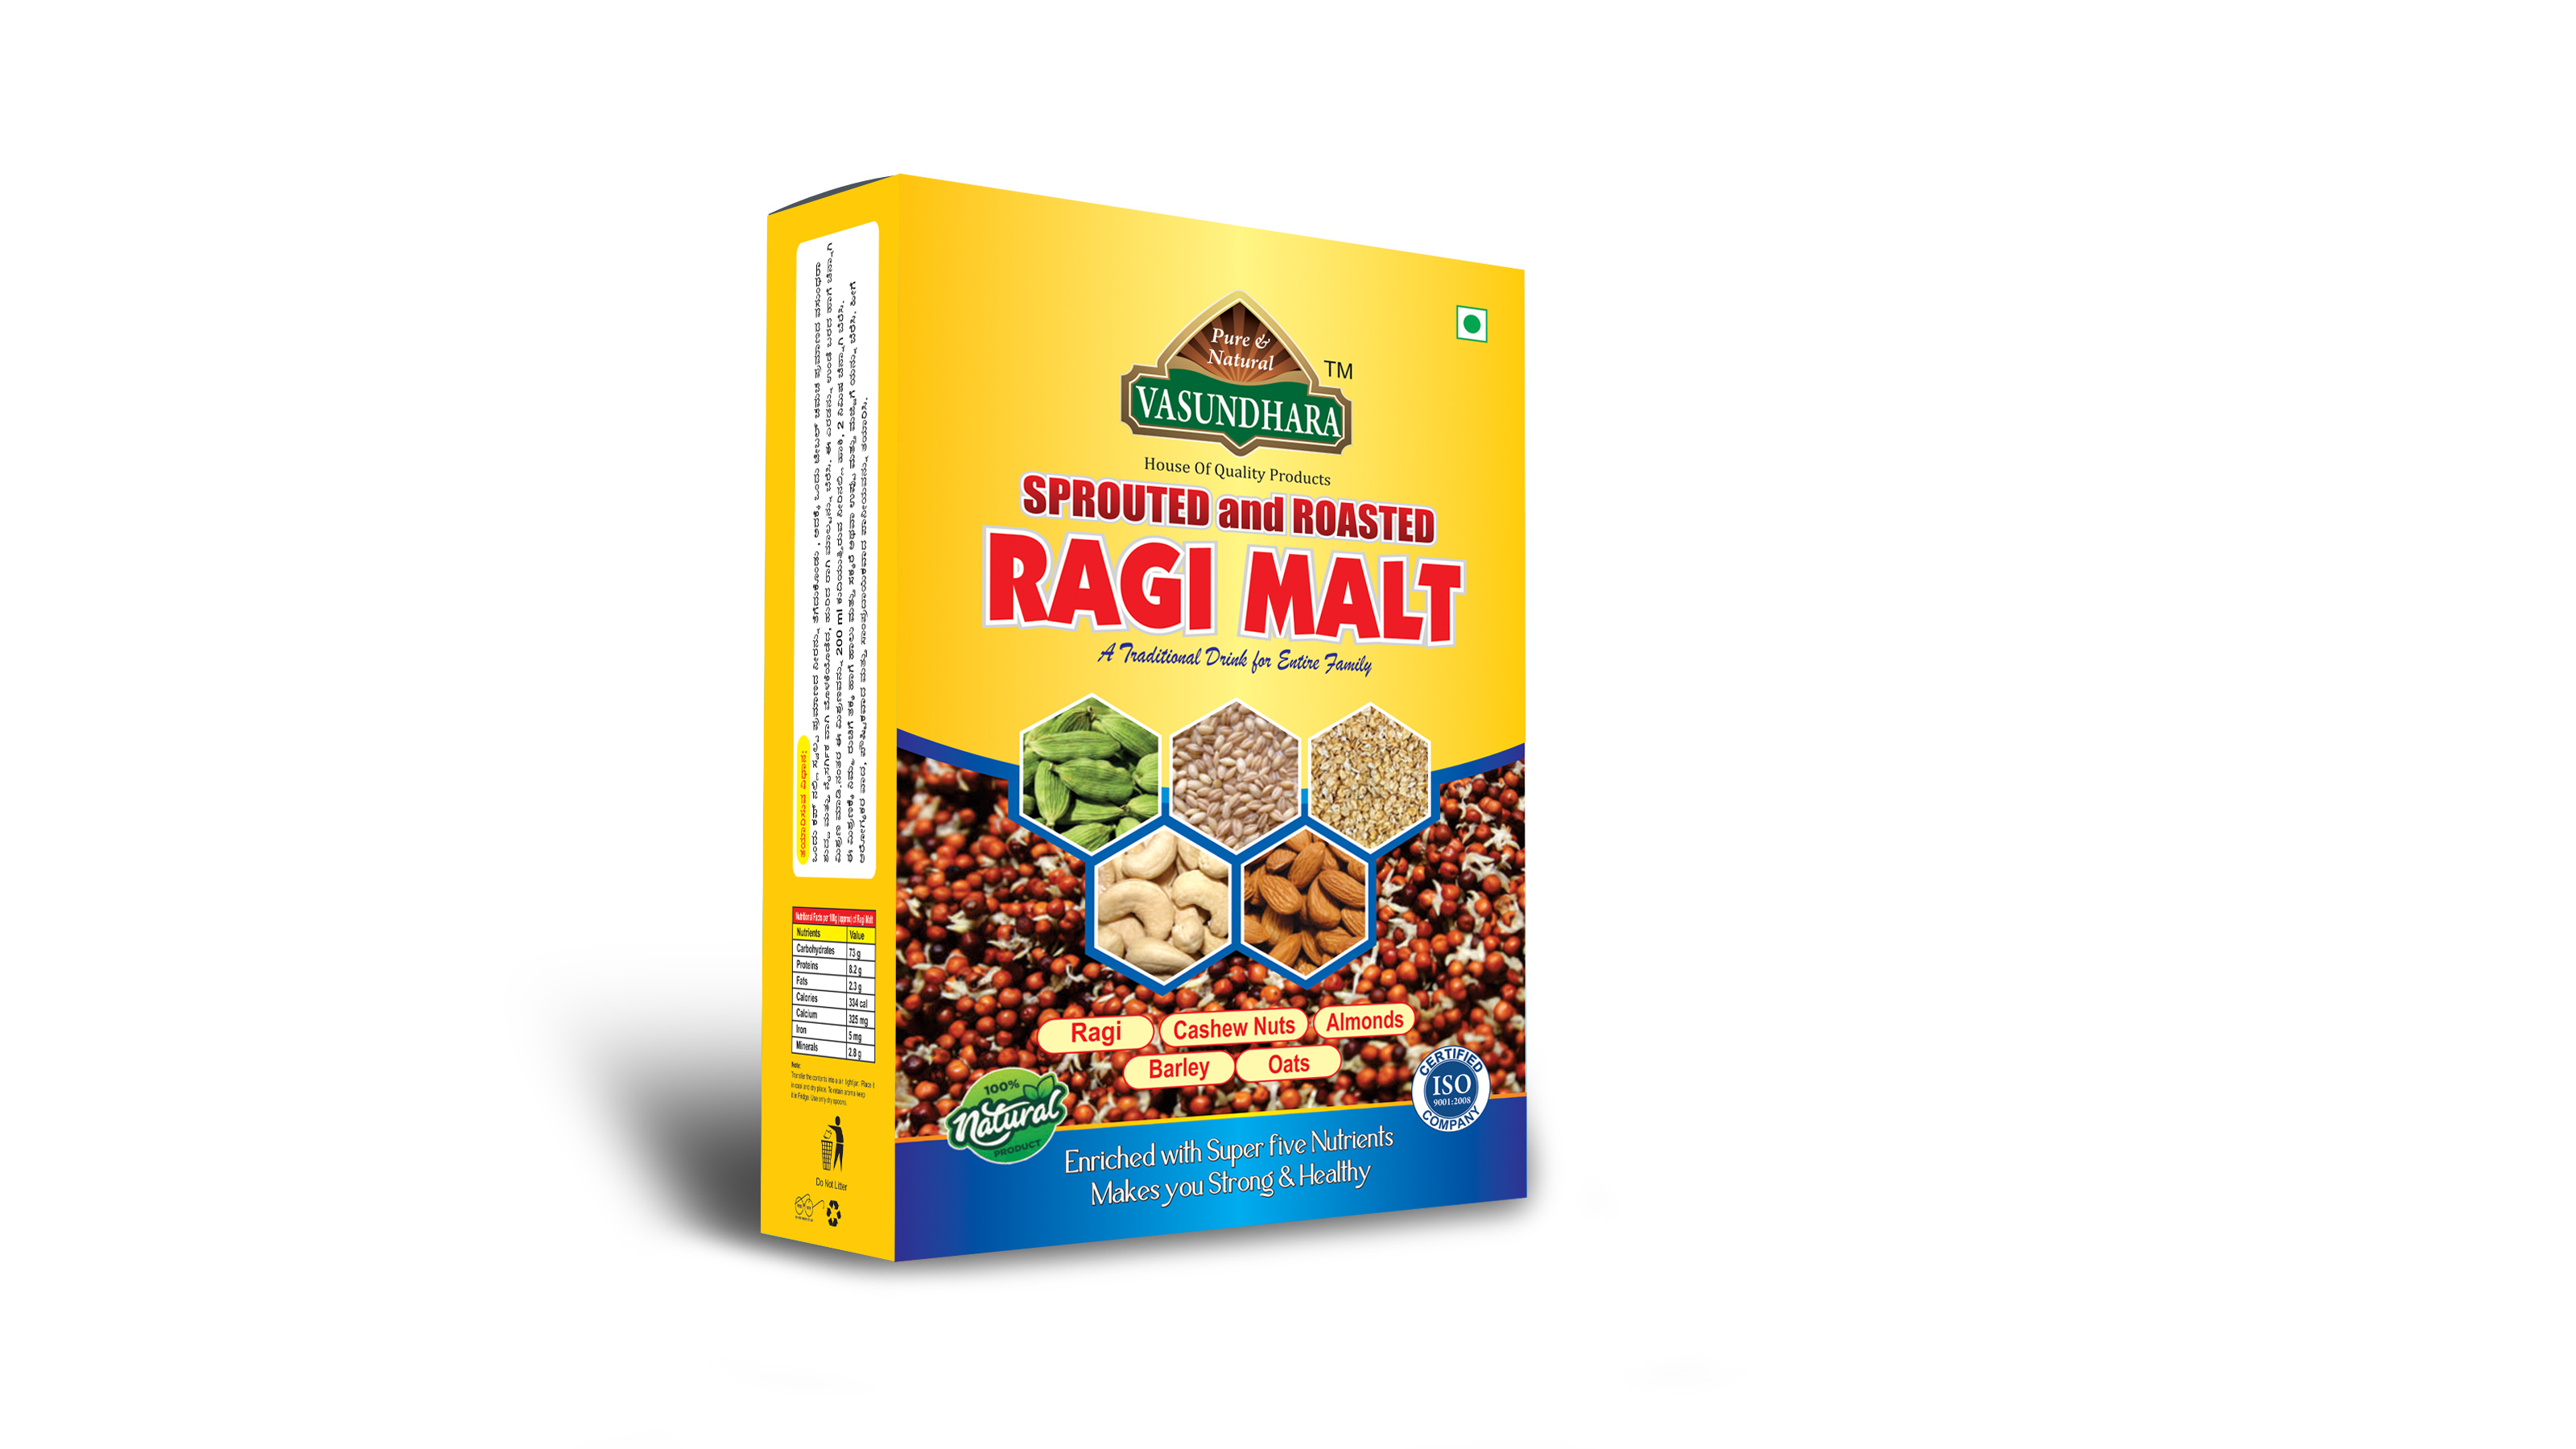 SPROUTED AND ROASTED RAGI MALT